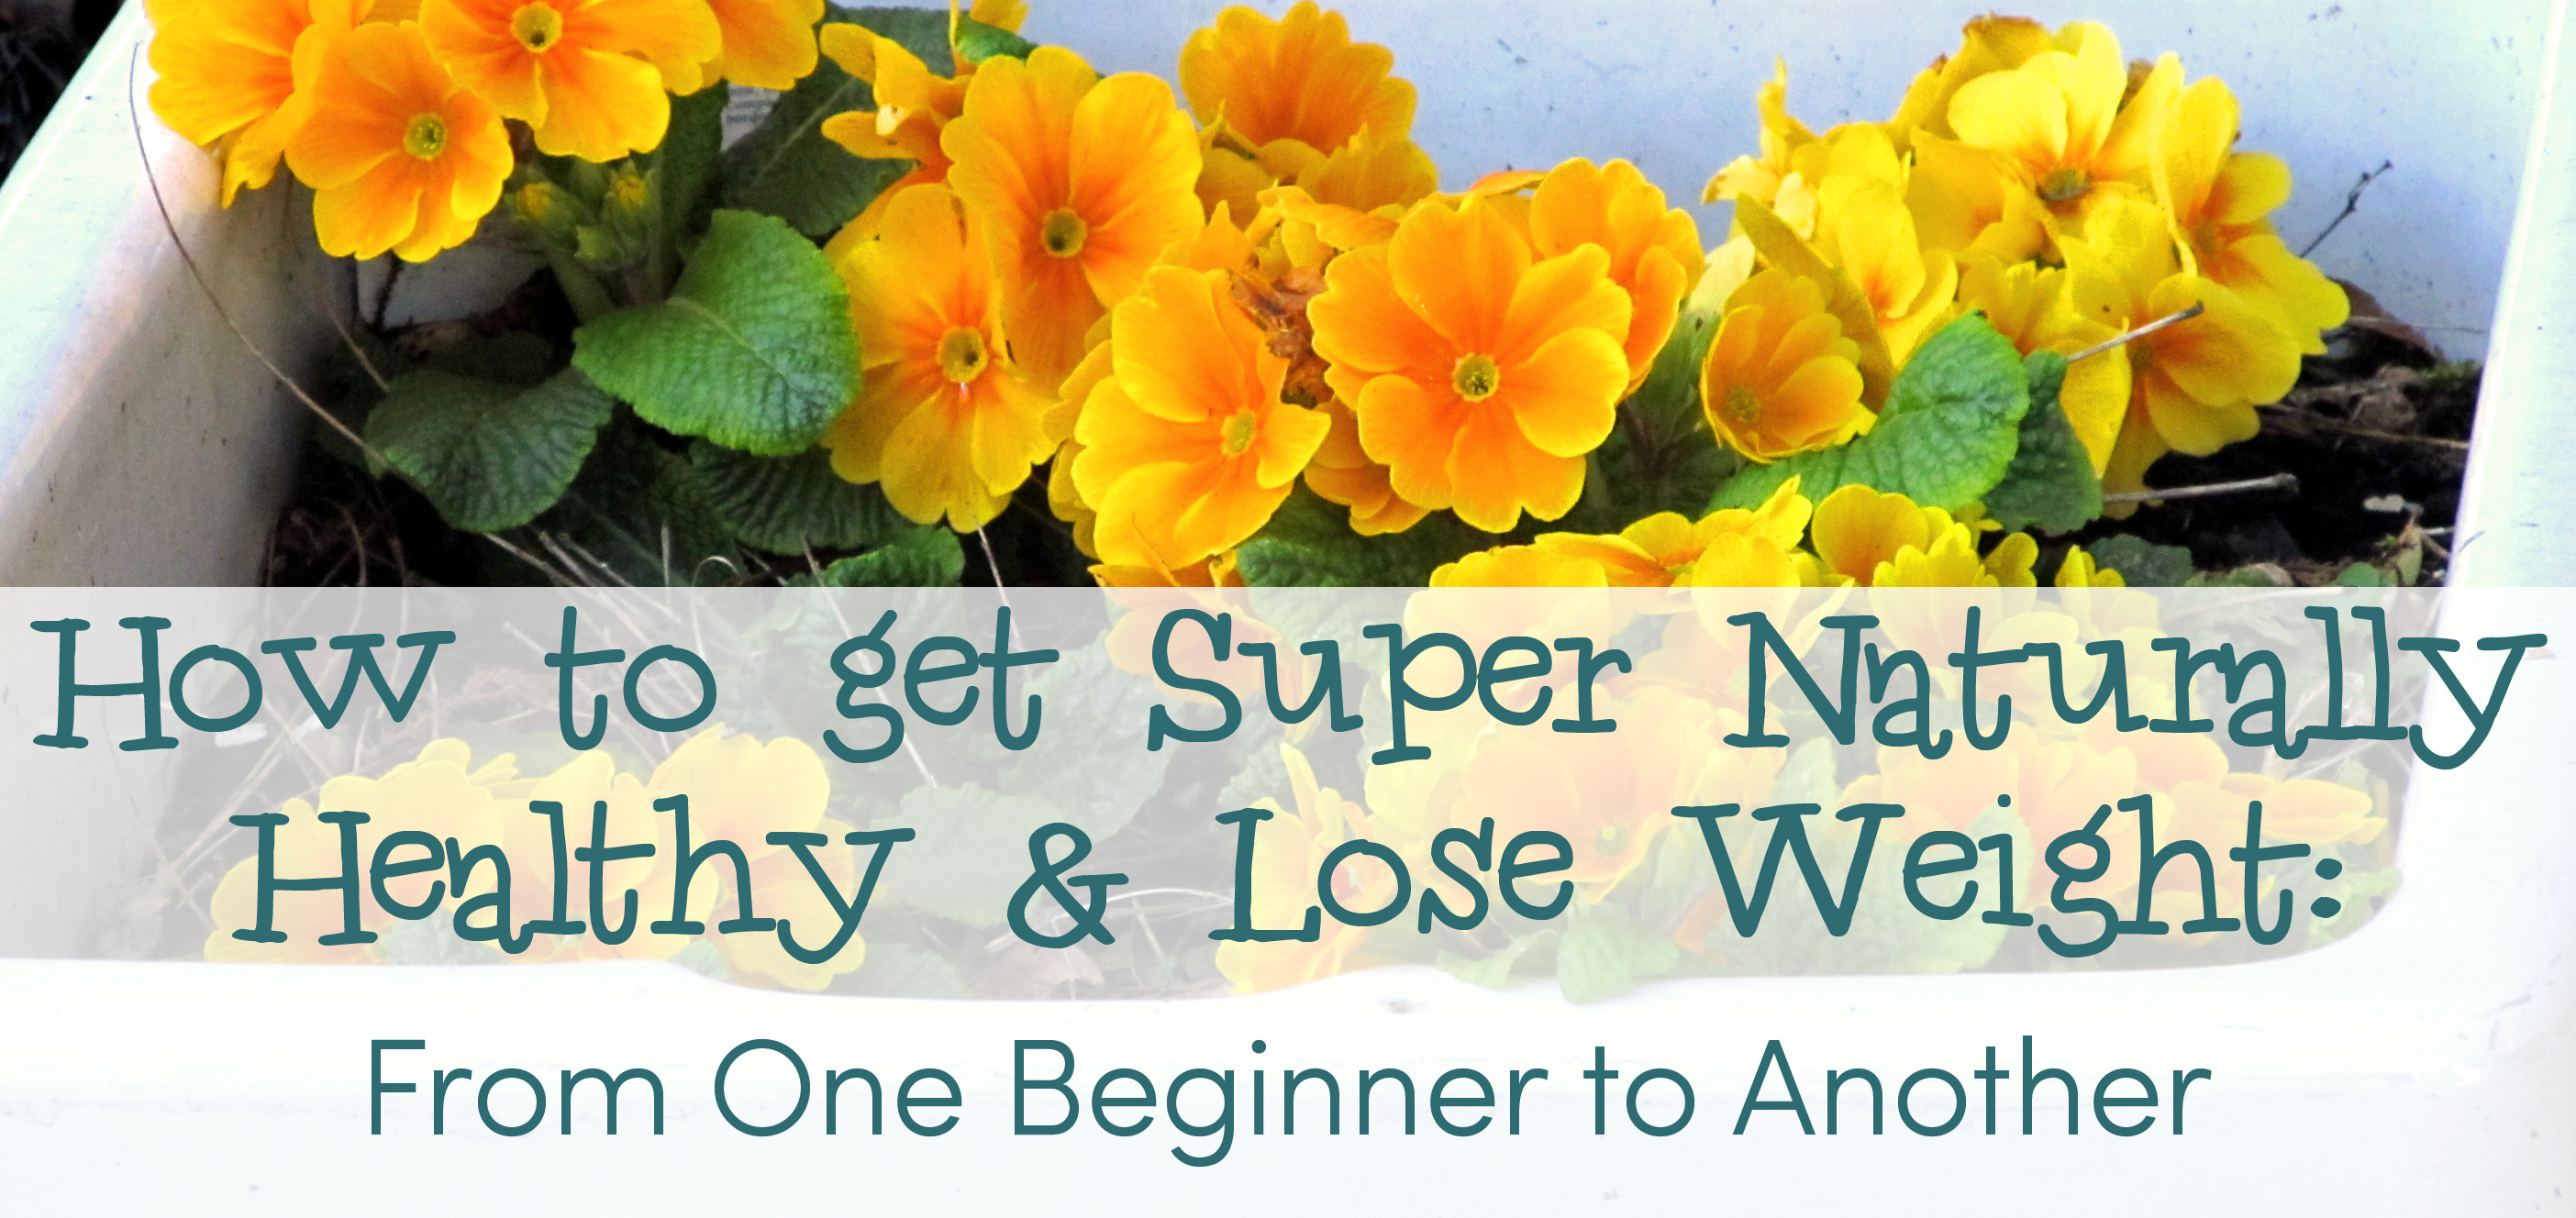 How to get Super Naturally Healthy & Lose Weight: From One Beginner to Another